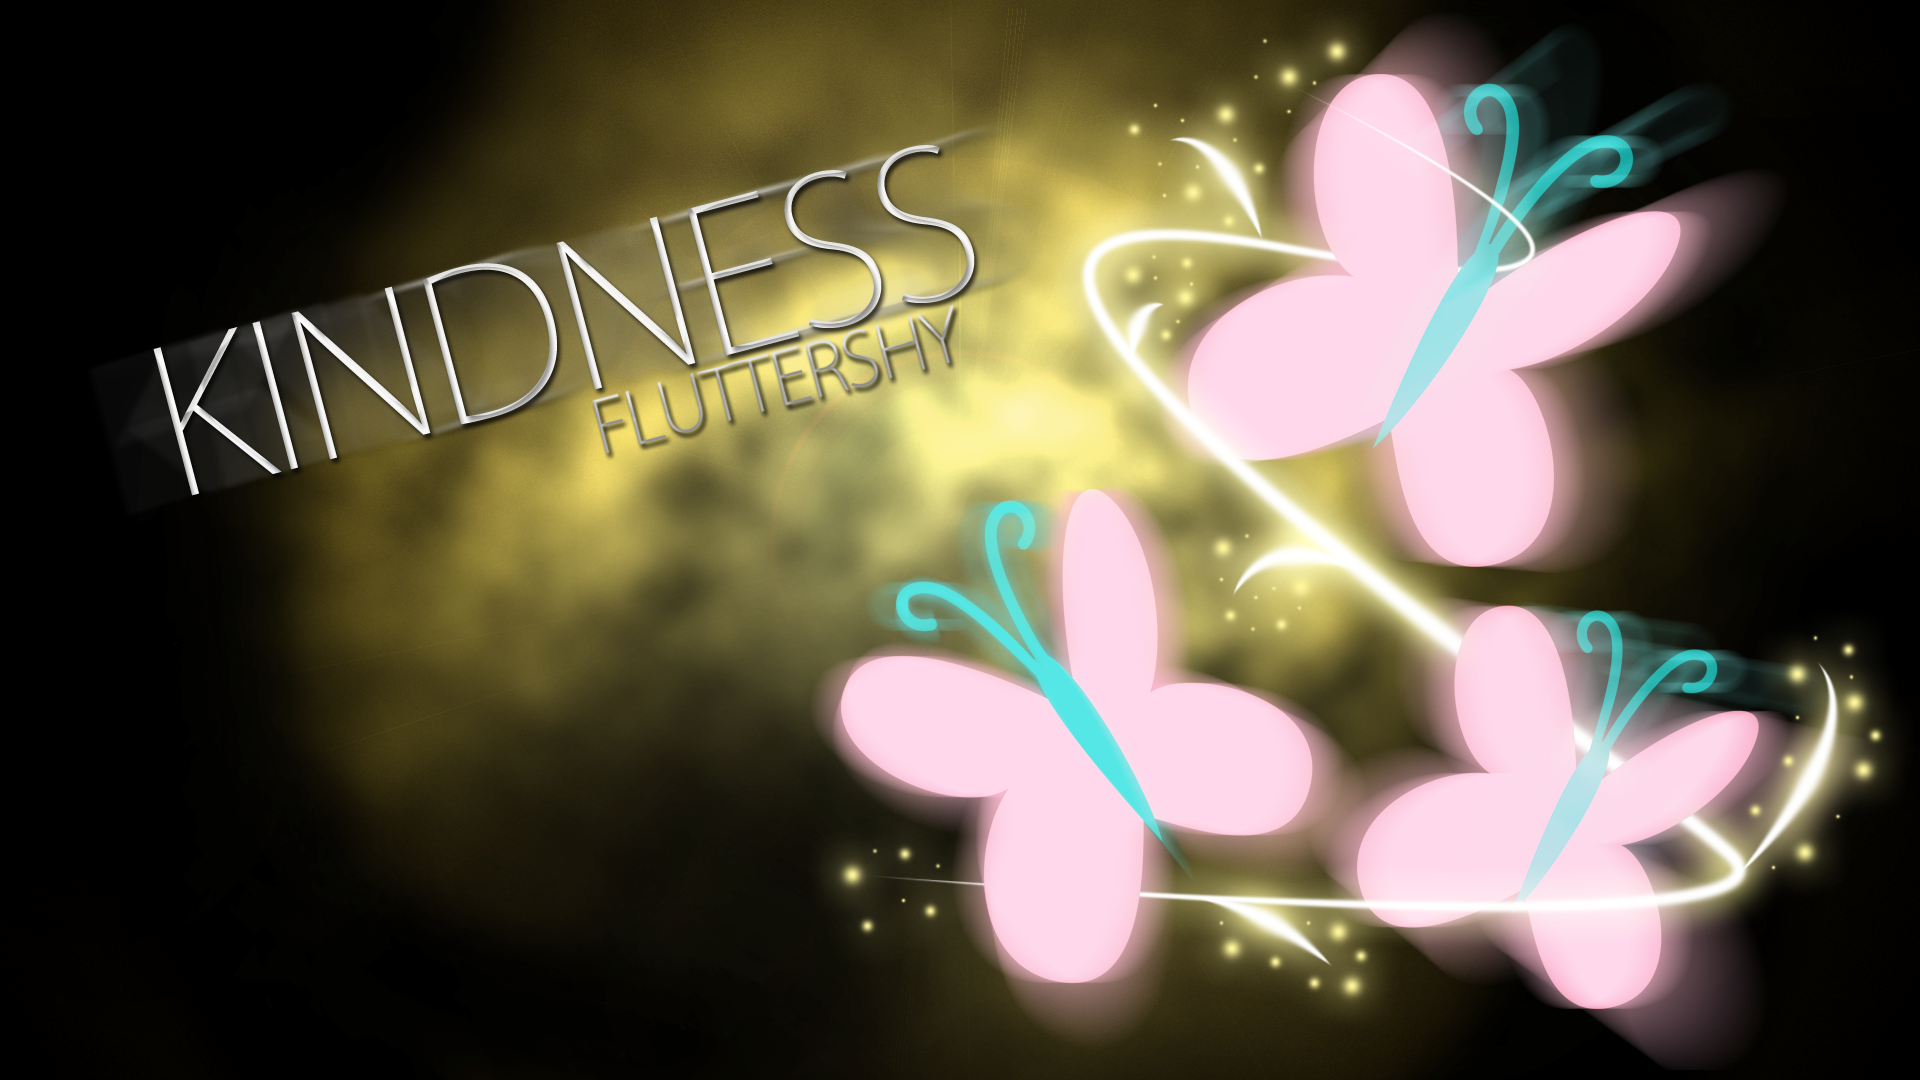 Fluttershy Kindness Cutie Mark Wallpaper by BlackGryph0n and BlueDragonHans